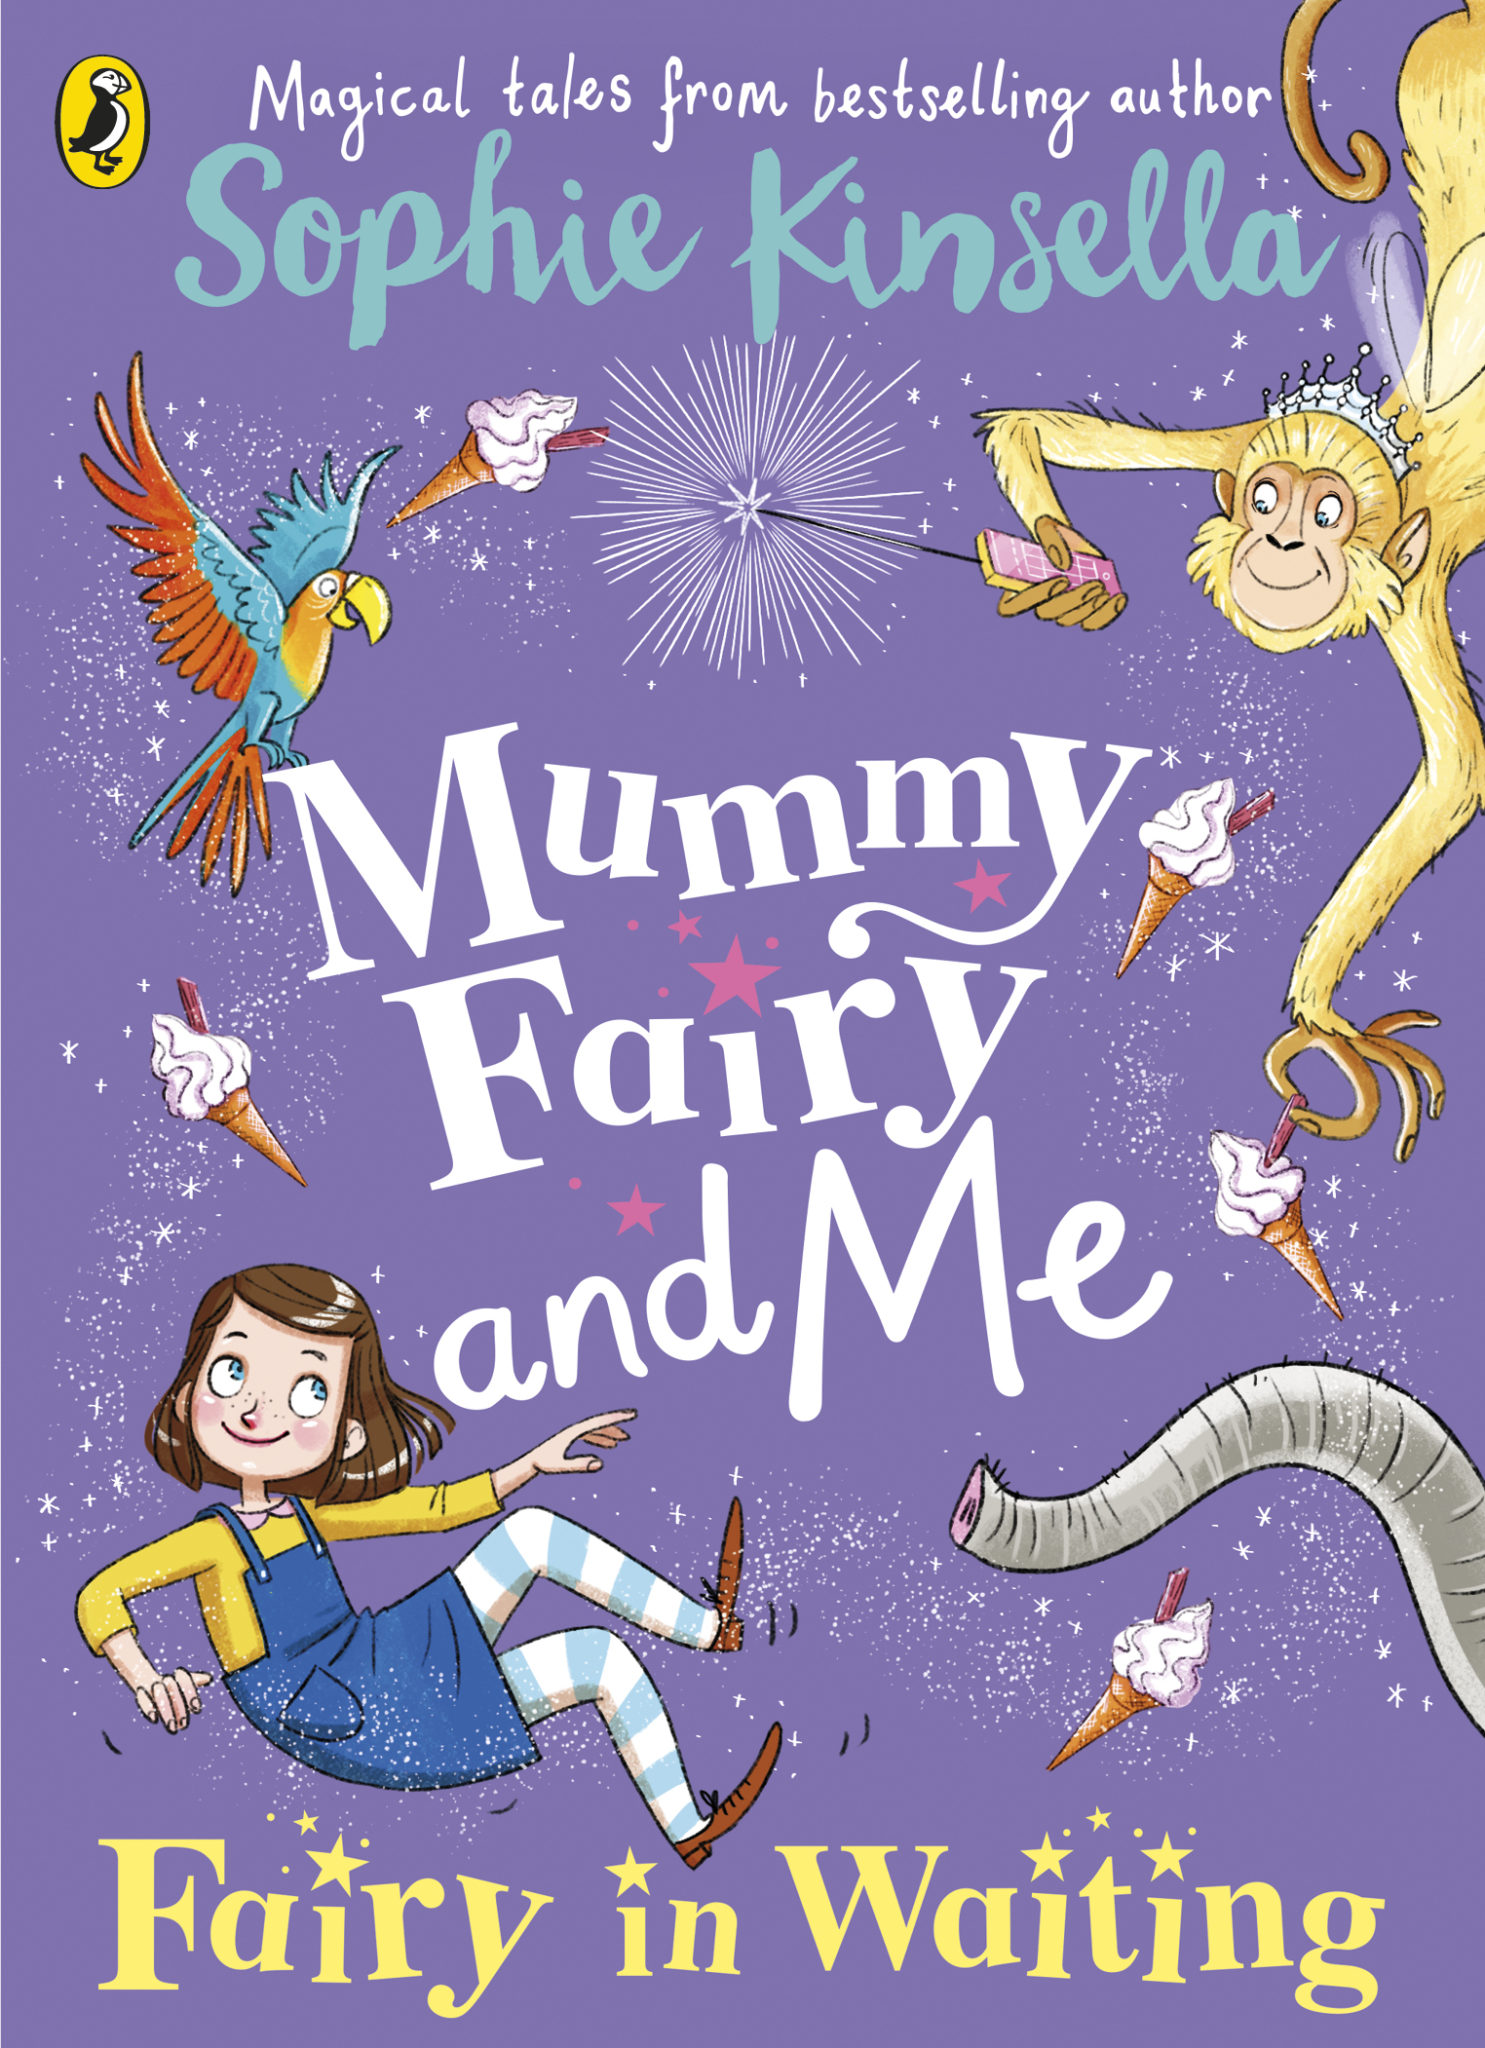 Sophie Kinsella’s second book for younger children, Mummy Fairy and Me: Fairy-in-Waiting